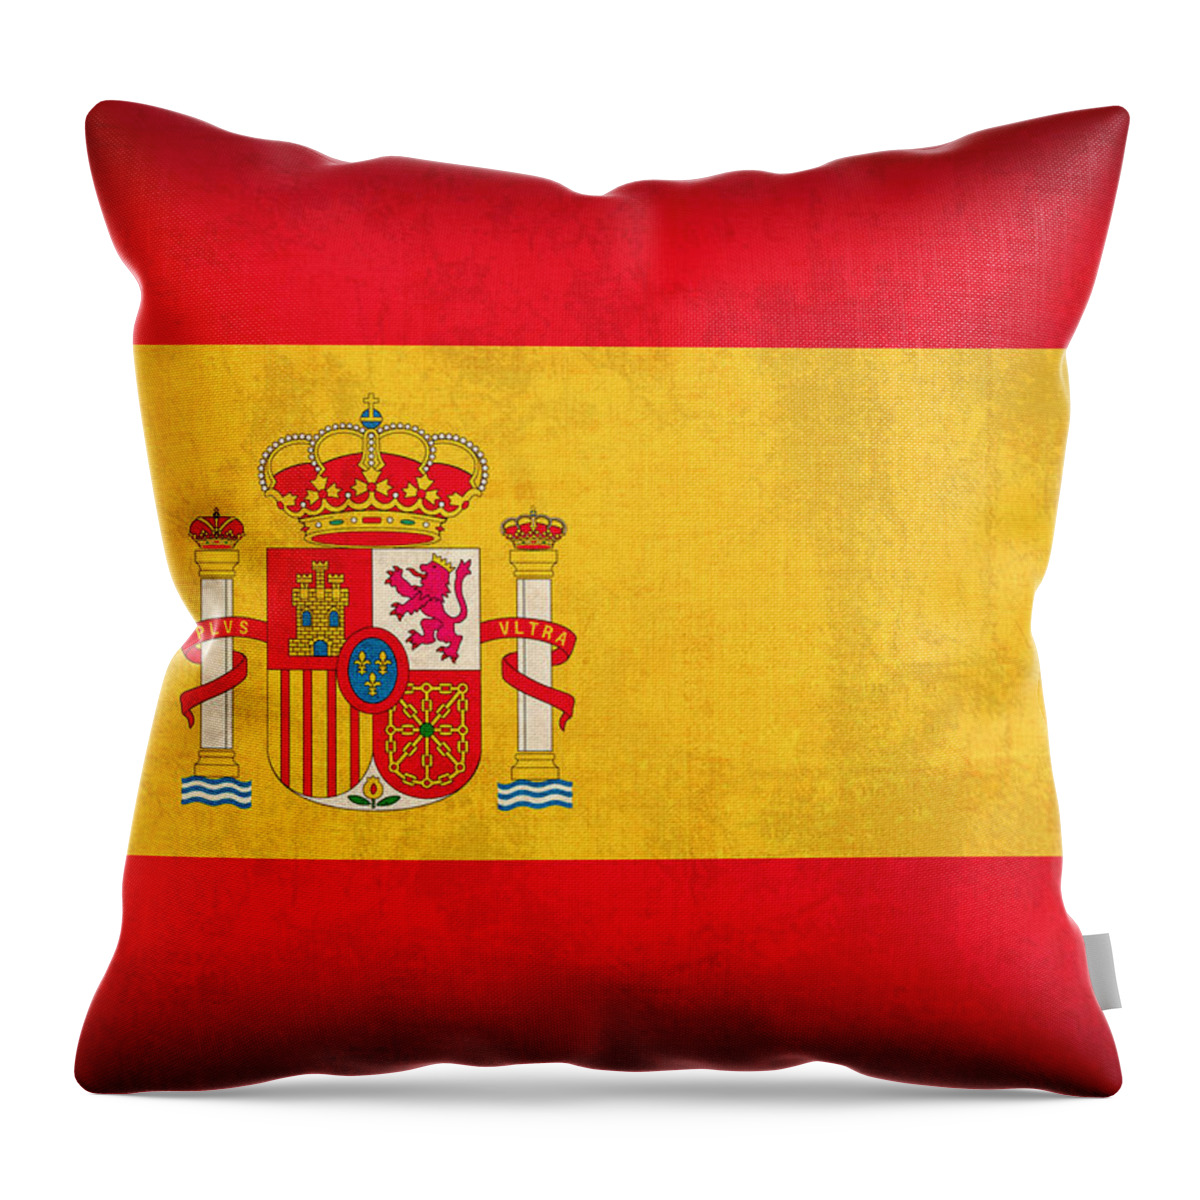 Spain Flag Vintage Distressed Finish Spanish Madrid Barcelona Europe Nation Country Throw Pillow featuring the mixed media Spain Flag Vintage Distressed Finish by Design Turnpike